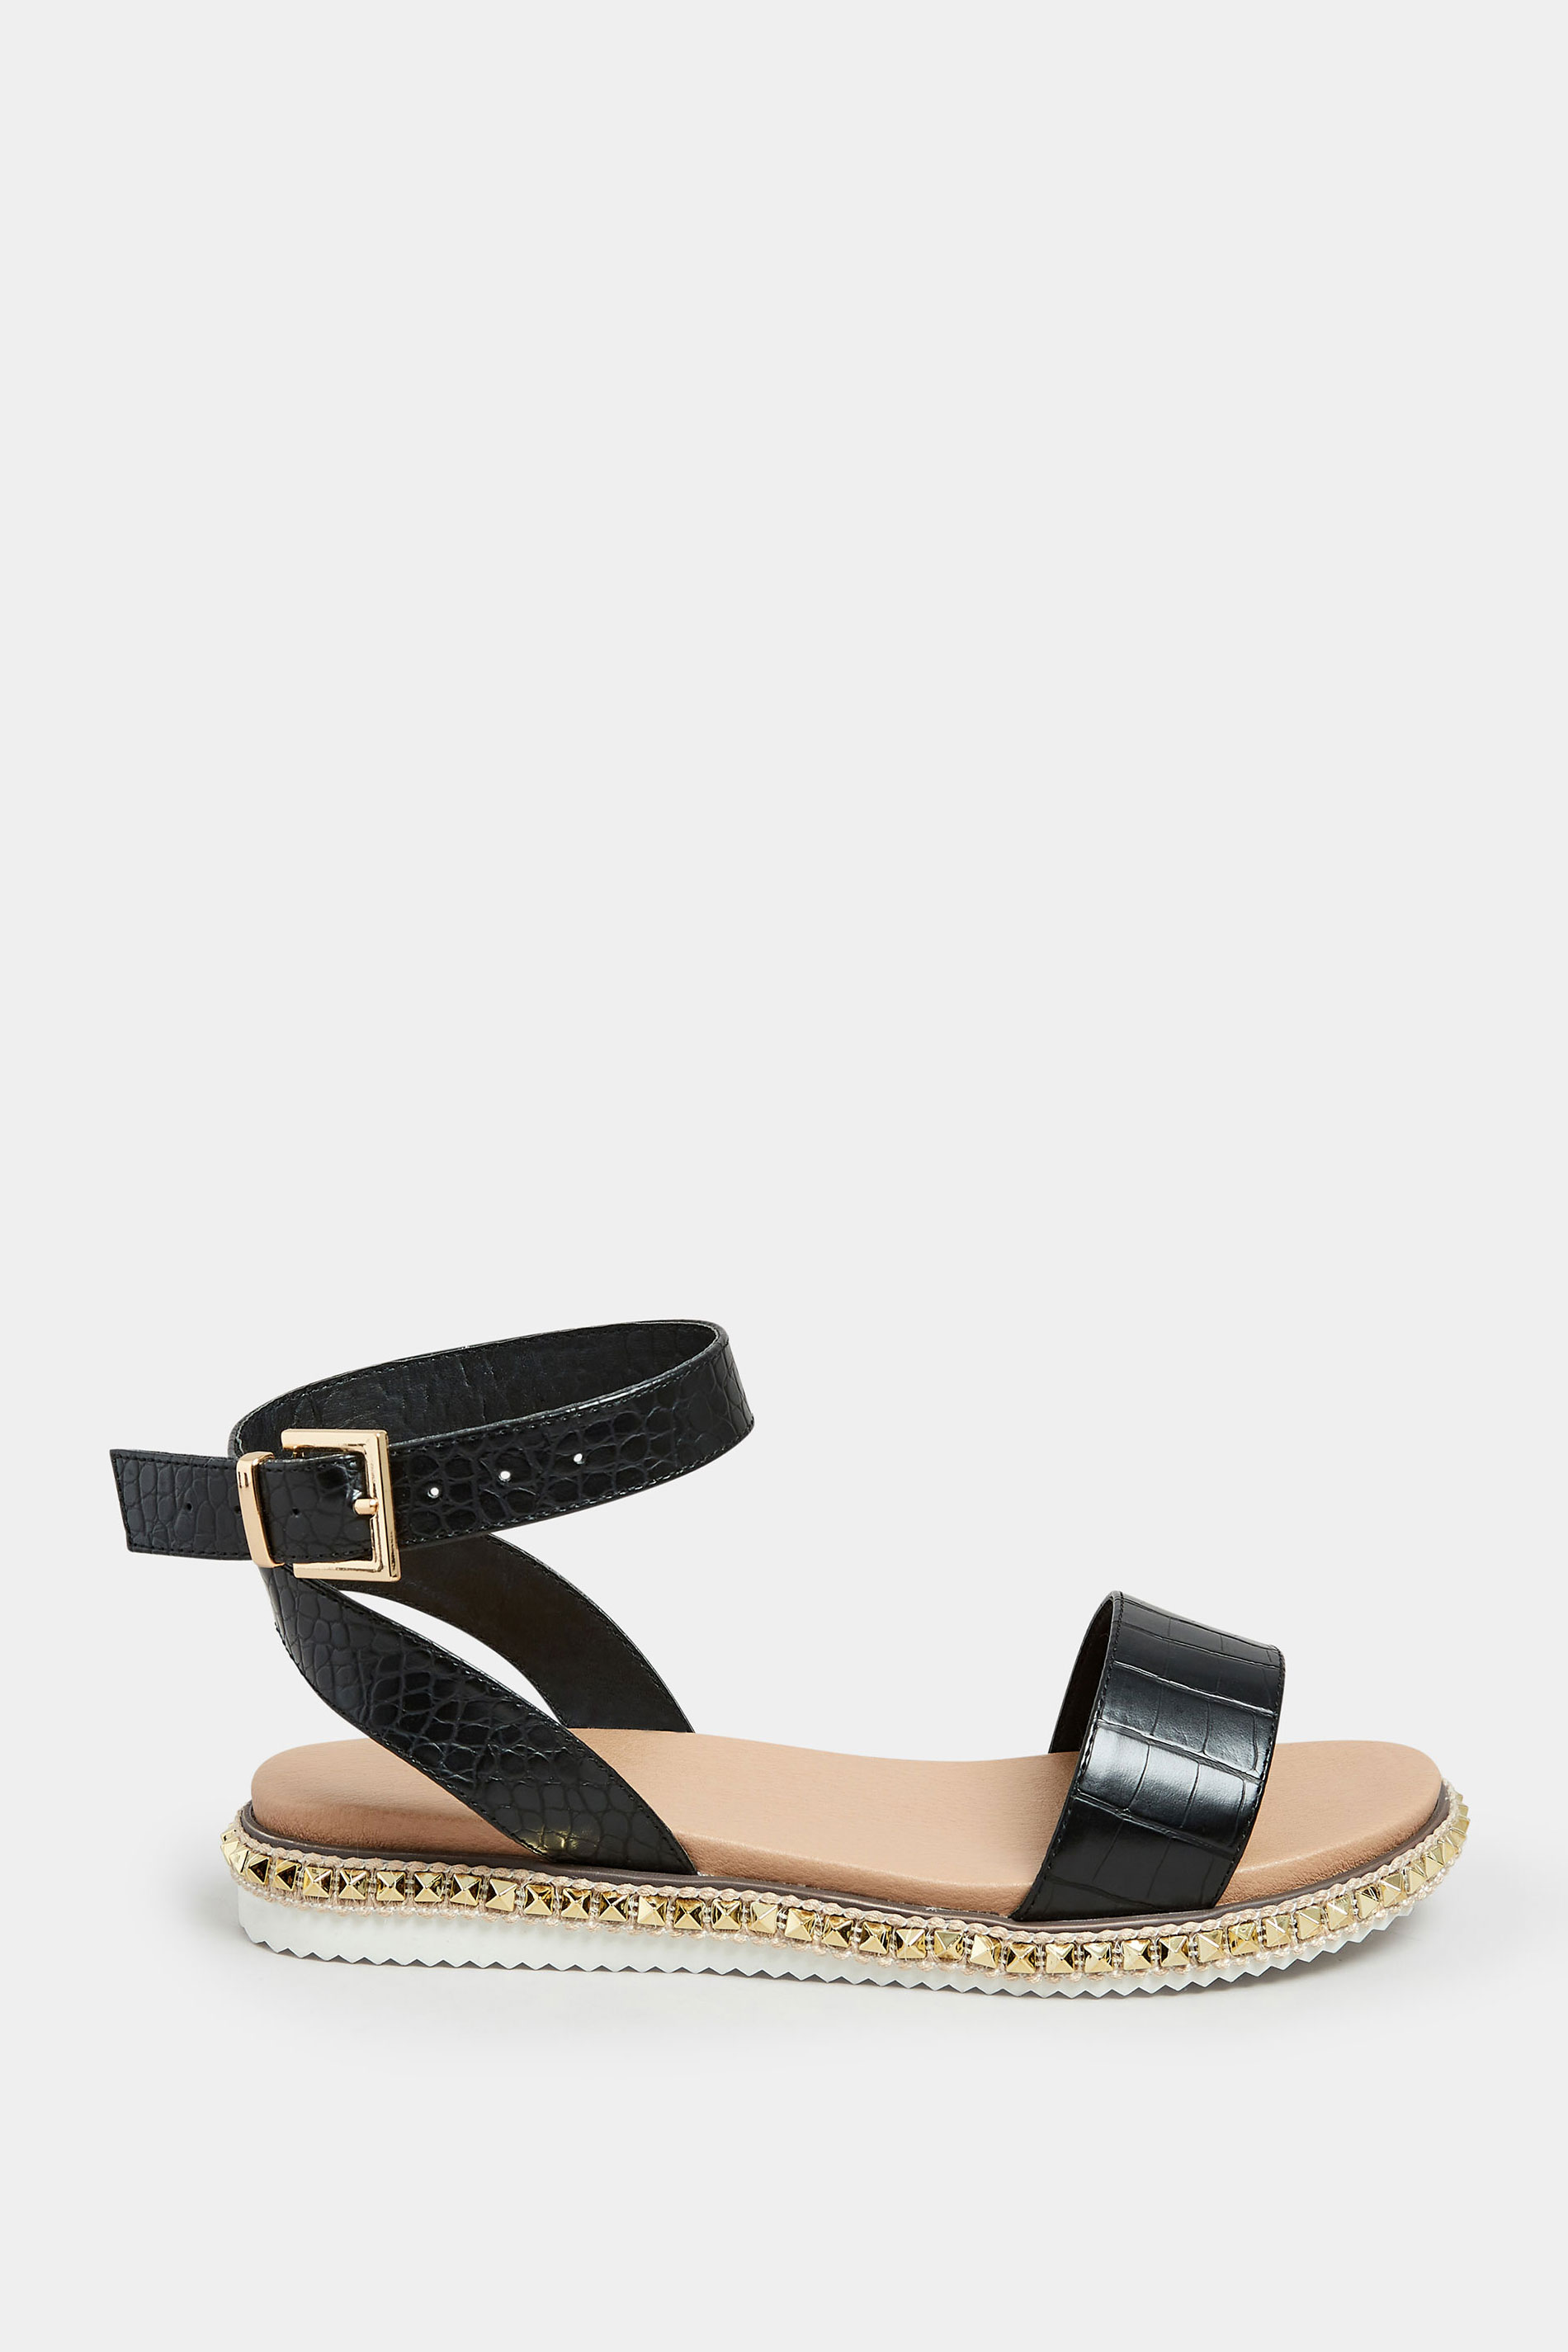 Black Croc Faux Leather Studded Sandals In Extra Wide EEE Fit | Yours Clothing 3